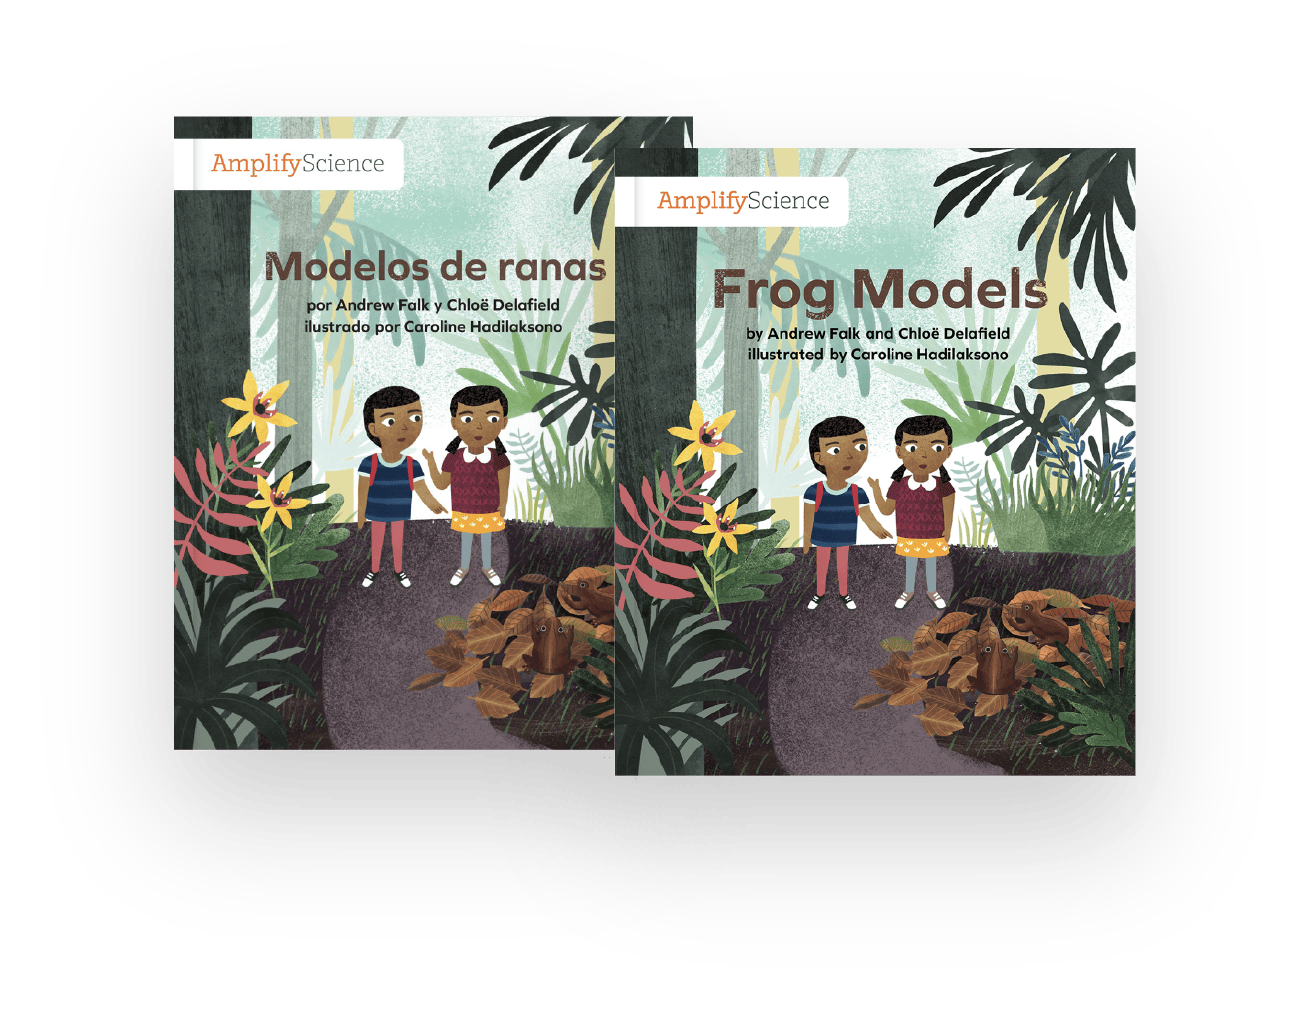 Open children's book displaying a page in spanish and another in english about frog models, with illustrations of children observing frogs in a forest setting.